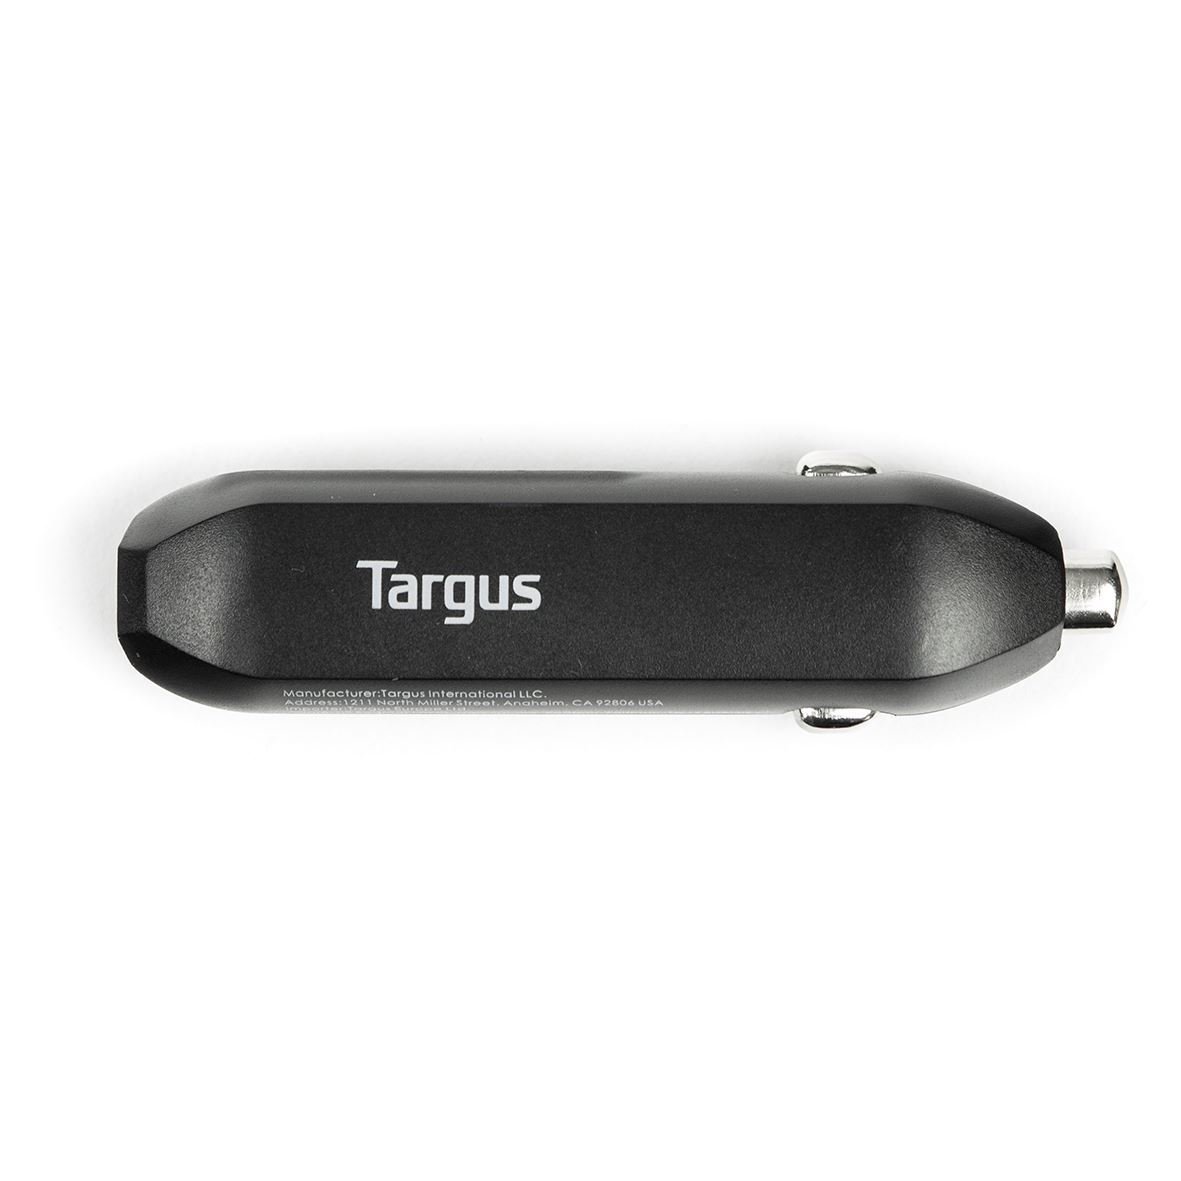 Targus - universal 4.8 charger for Phones & Tablets